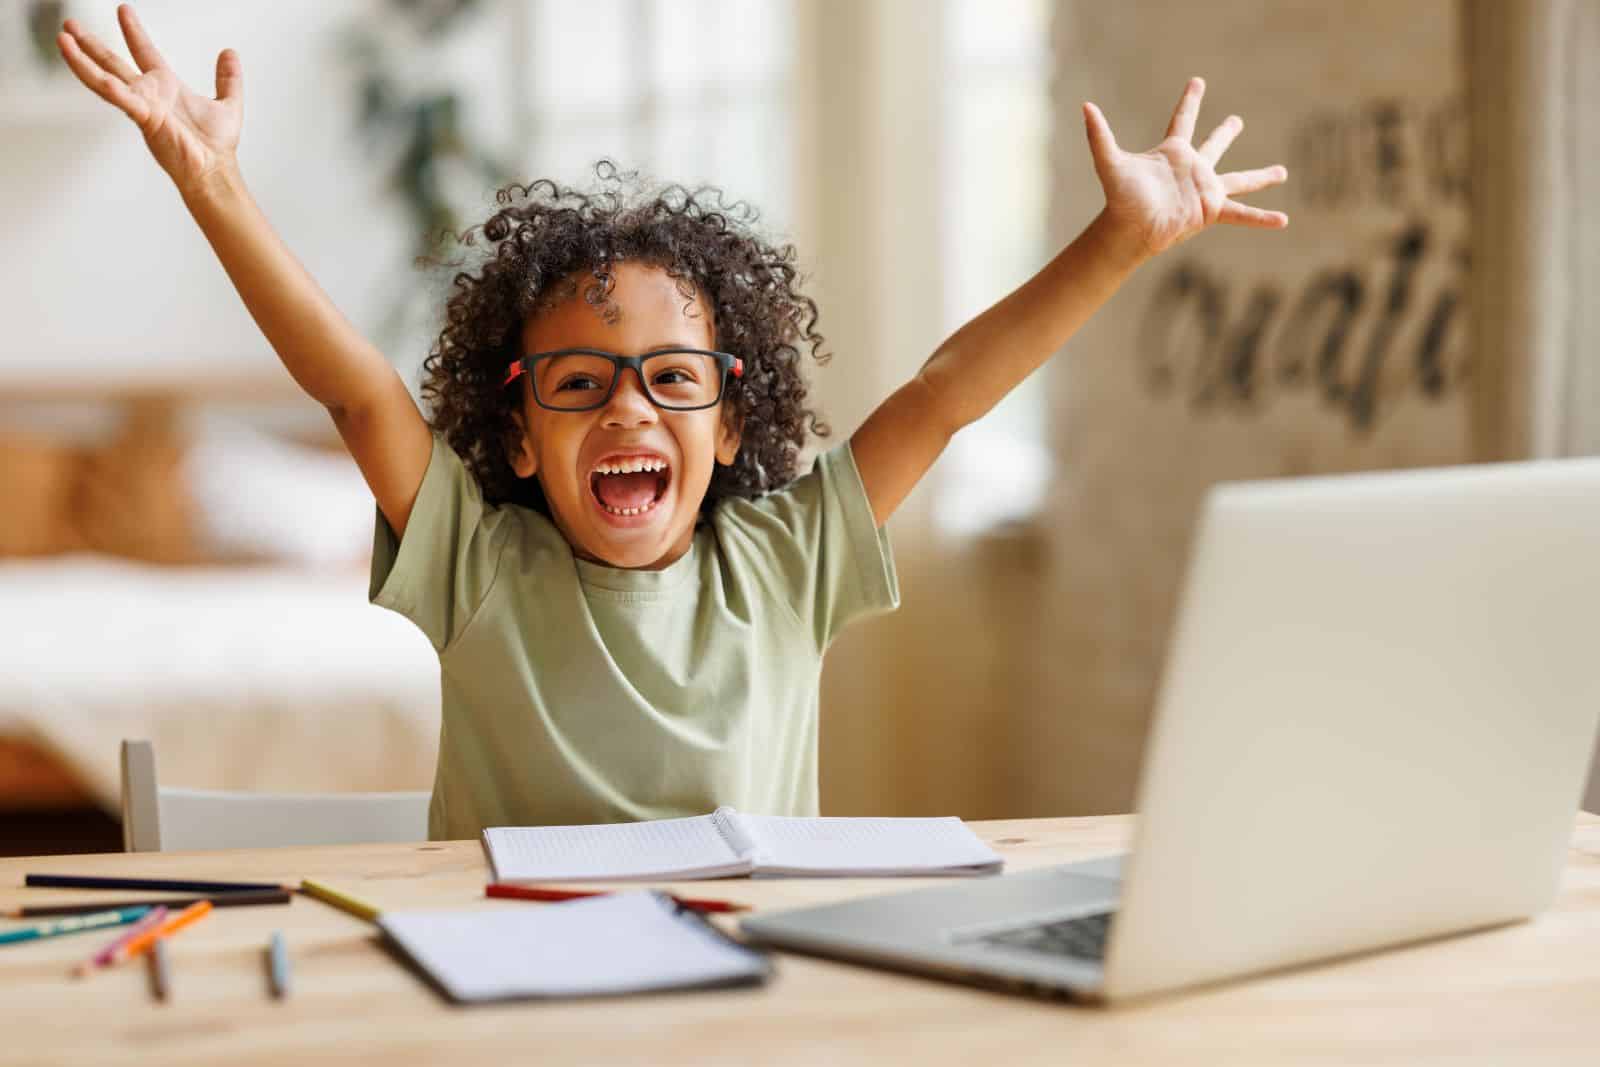 Image credit: Shutterstock / Evgeny Atamanenko <p>Despite the risks, screens are powerful educational tools when used correctly. Are you utilizing technology to enhance your child’s learning?</p>